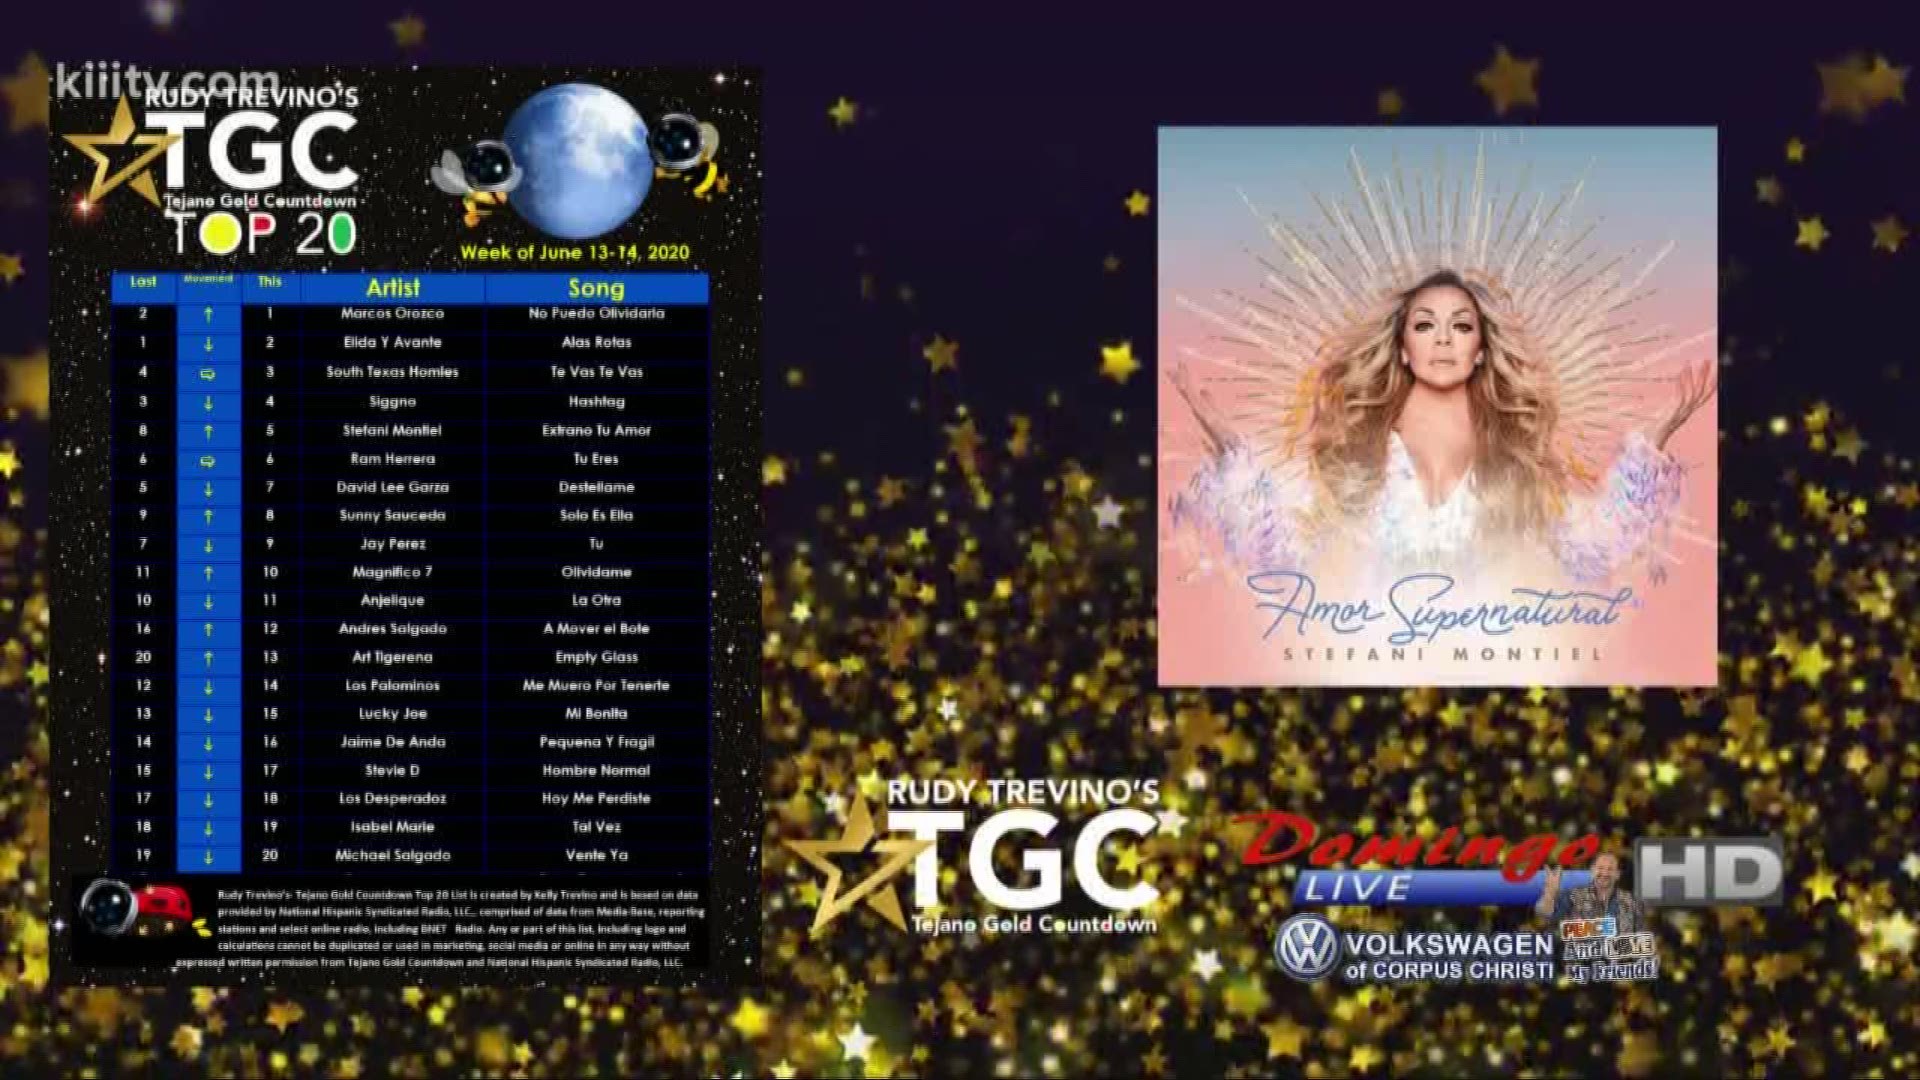 Rudy Trevino's Tejano Gold Countdown Top 5. For the full list, please visit www.tejanogoldcountdown.com